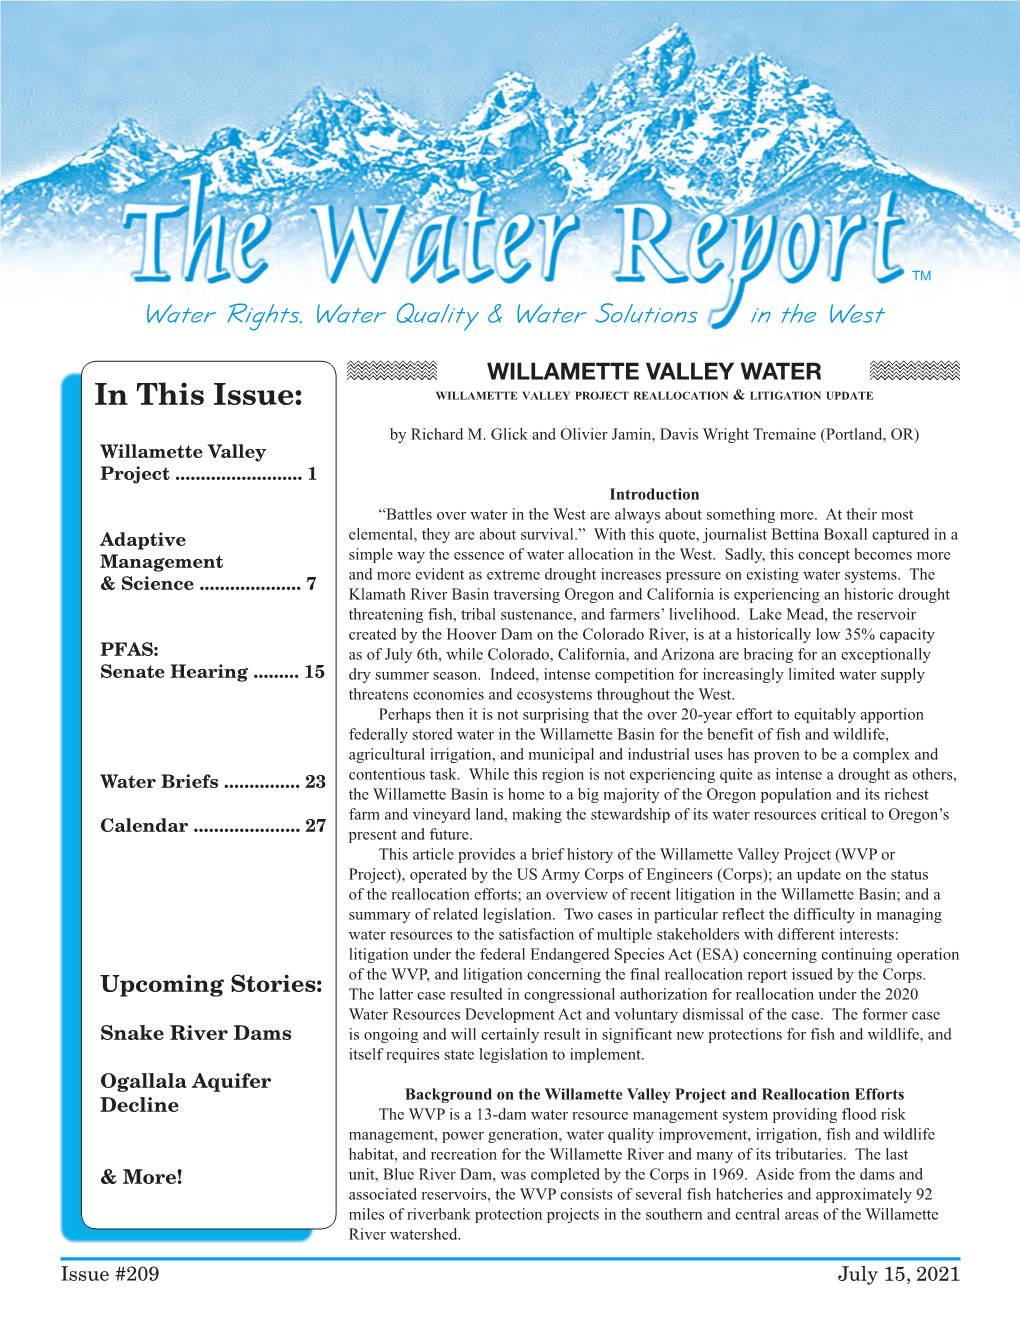 The Water Report No